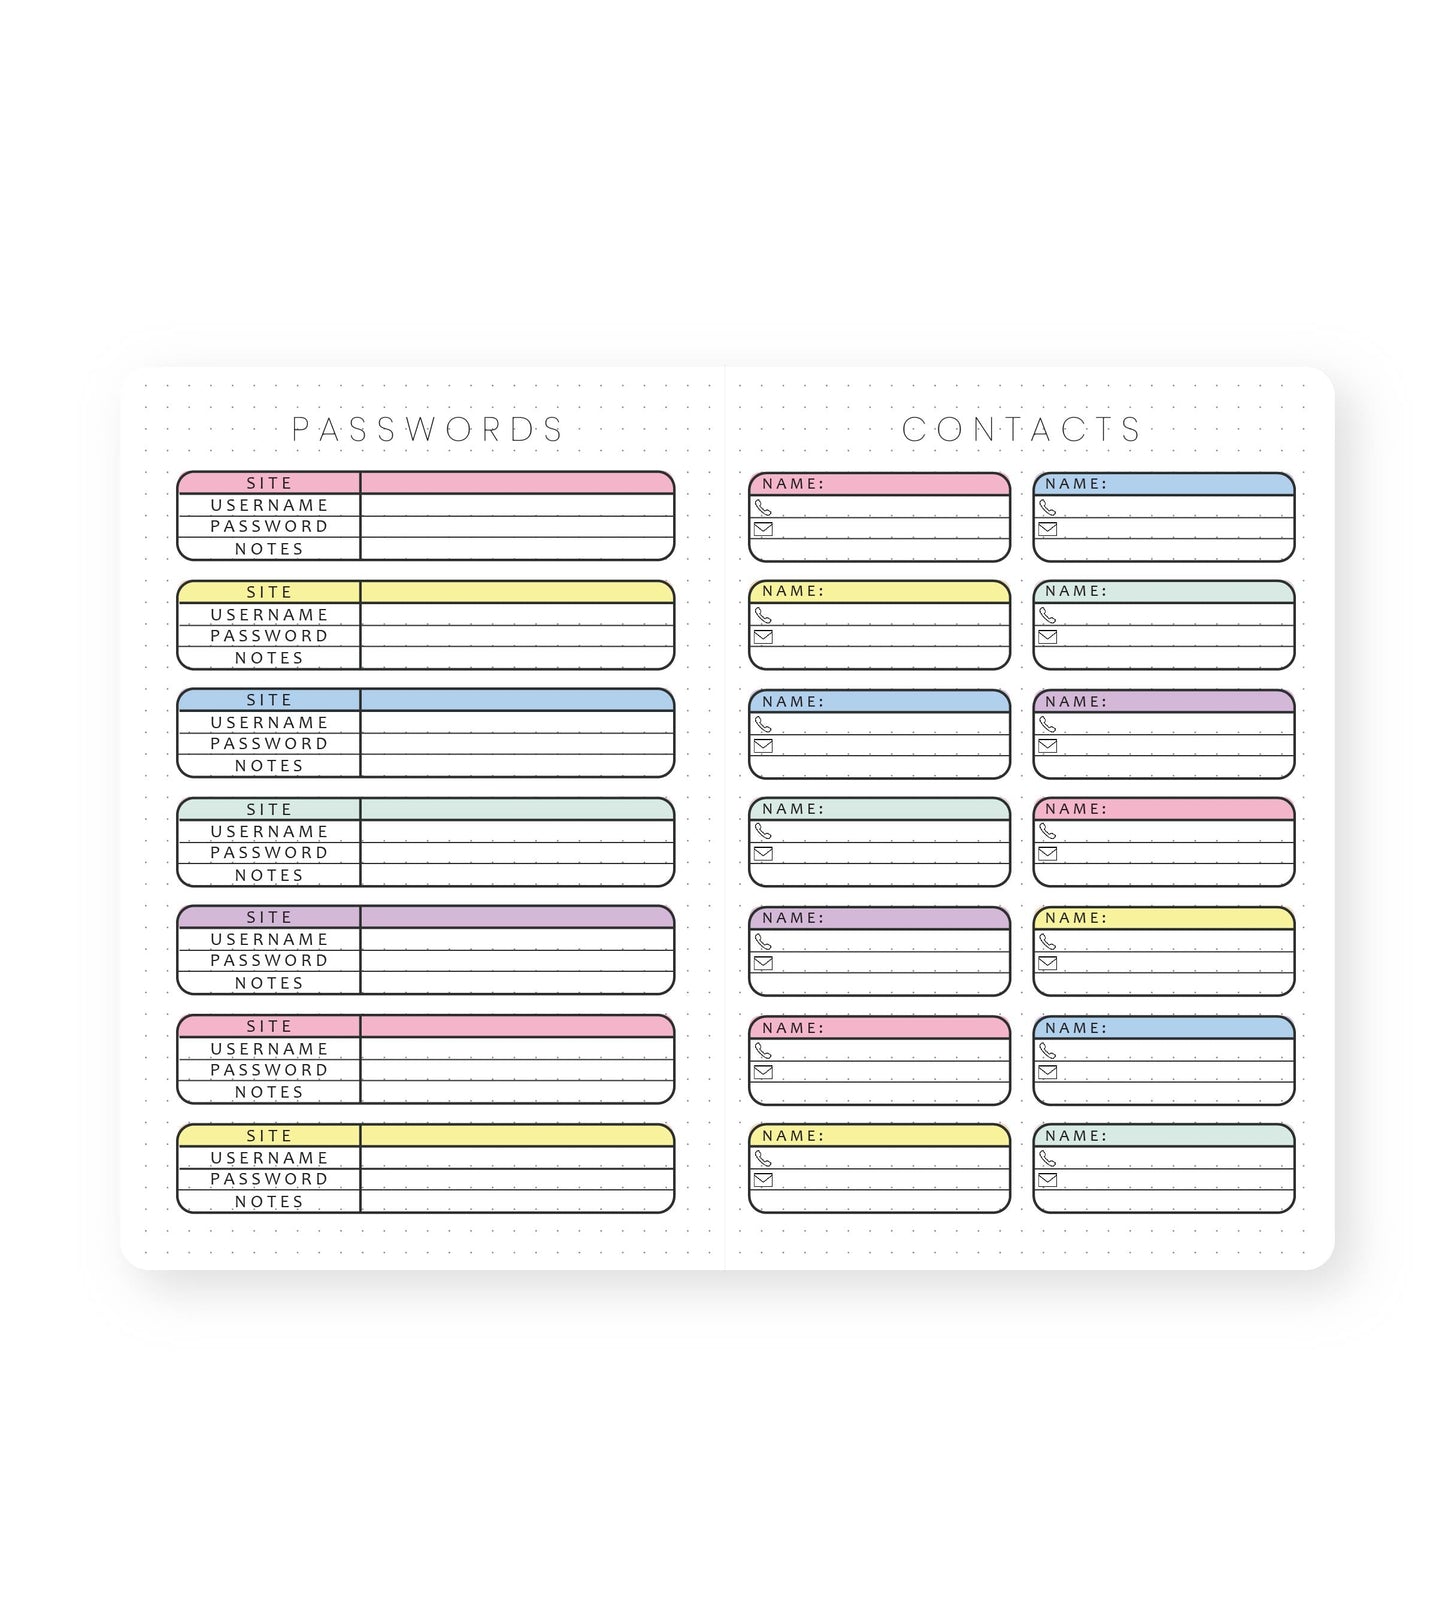 2024-25 Personalized Illustrated Planner Flower Farm